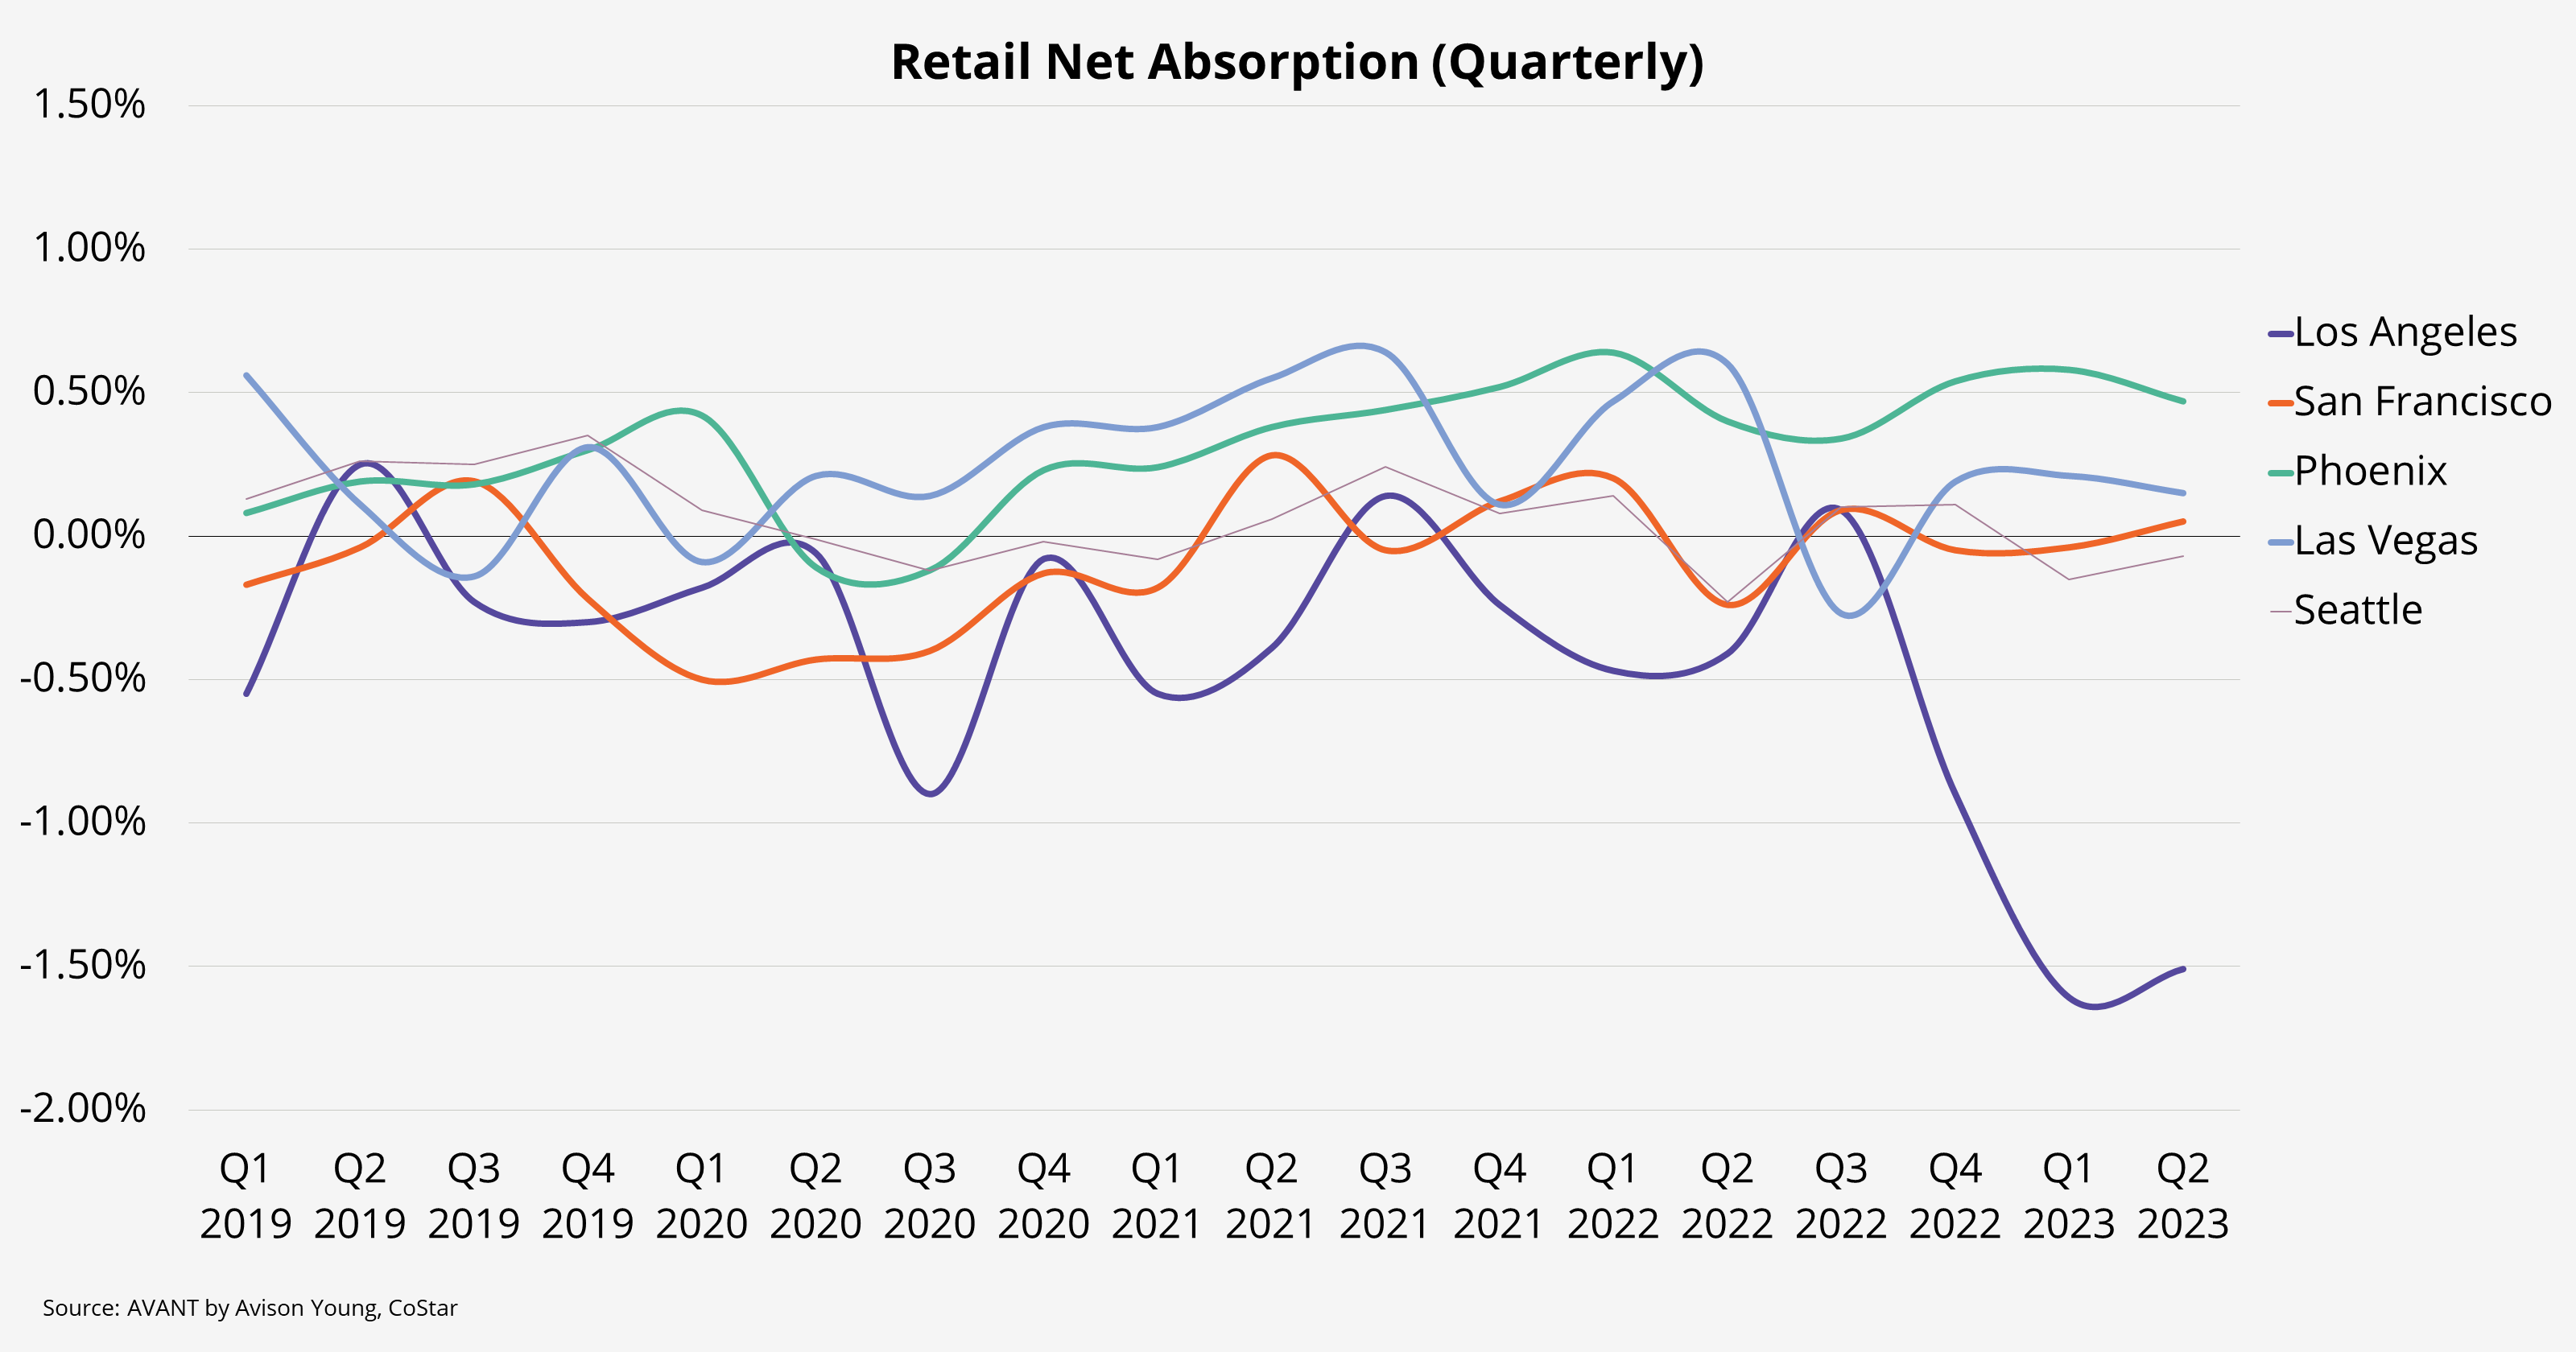 A graph depicting the retail net absorption of the past four years for Los Angeles, San Francisco, Phoenix, Las Vegas, and Seattle